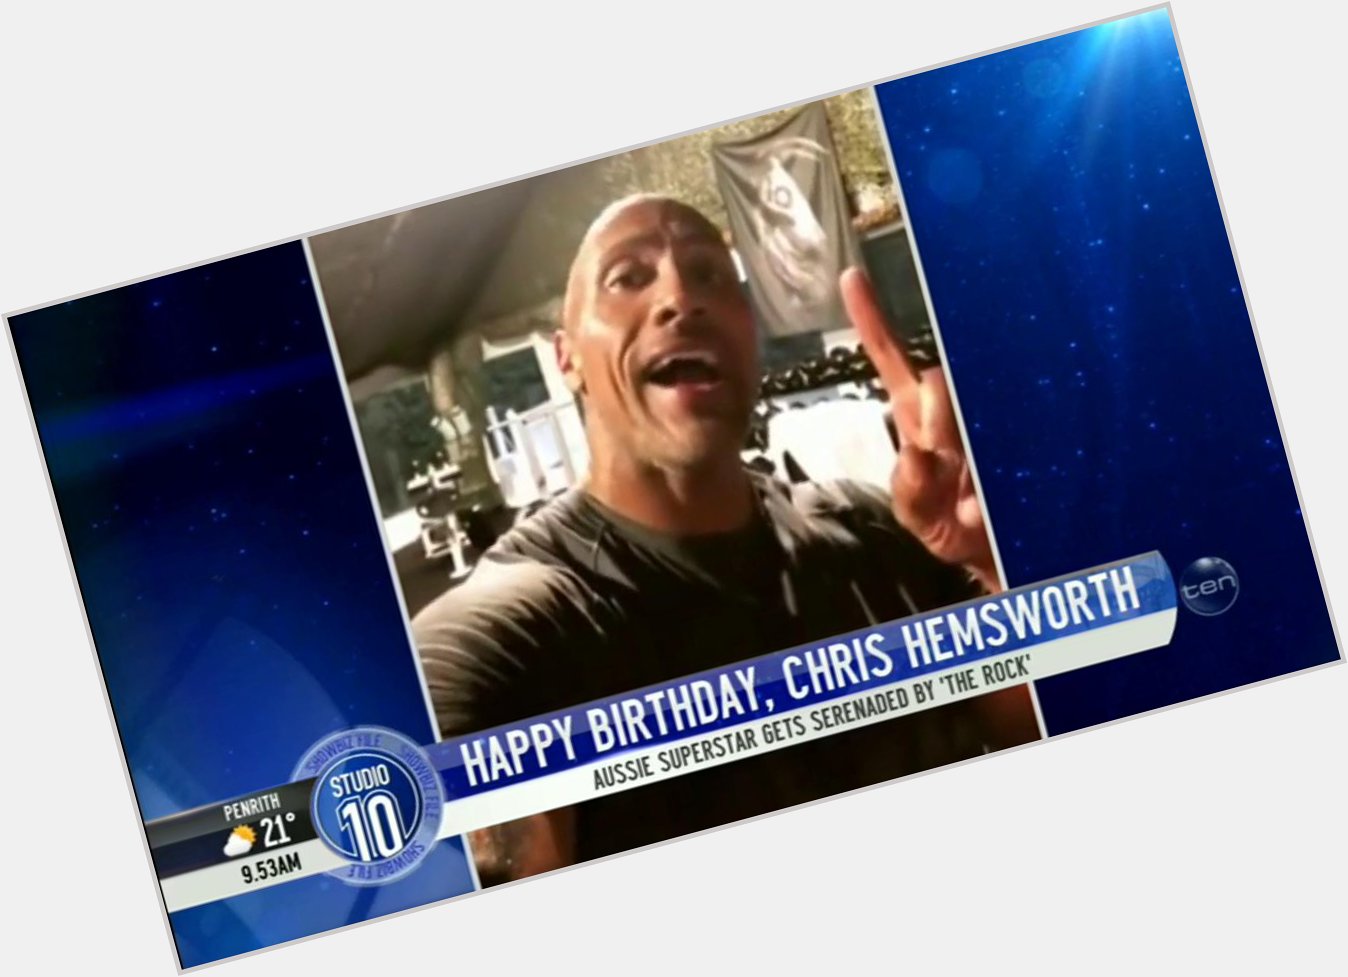 The Rock took time out of his workout to wish Chris Hemsworth a very Happy Birthday! 